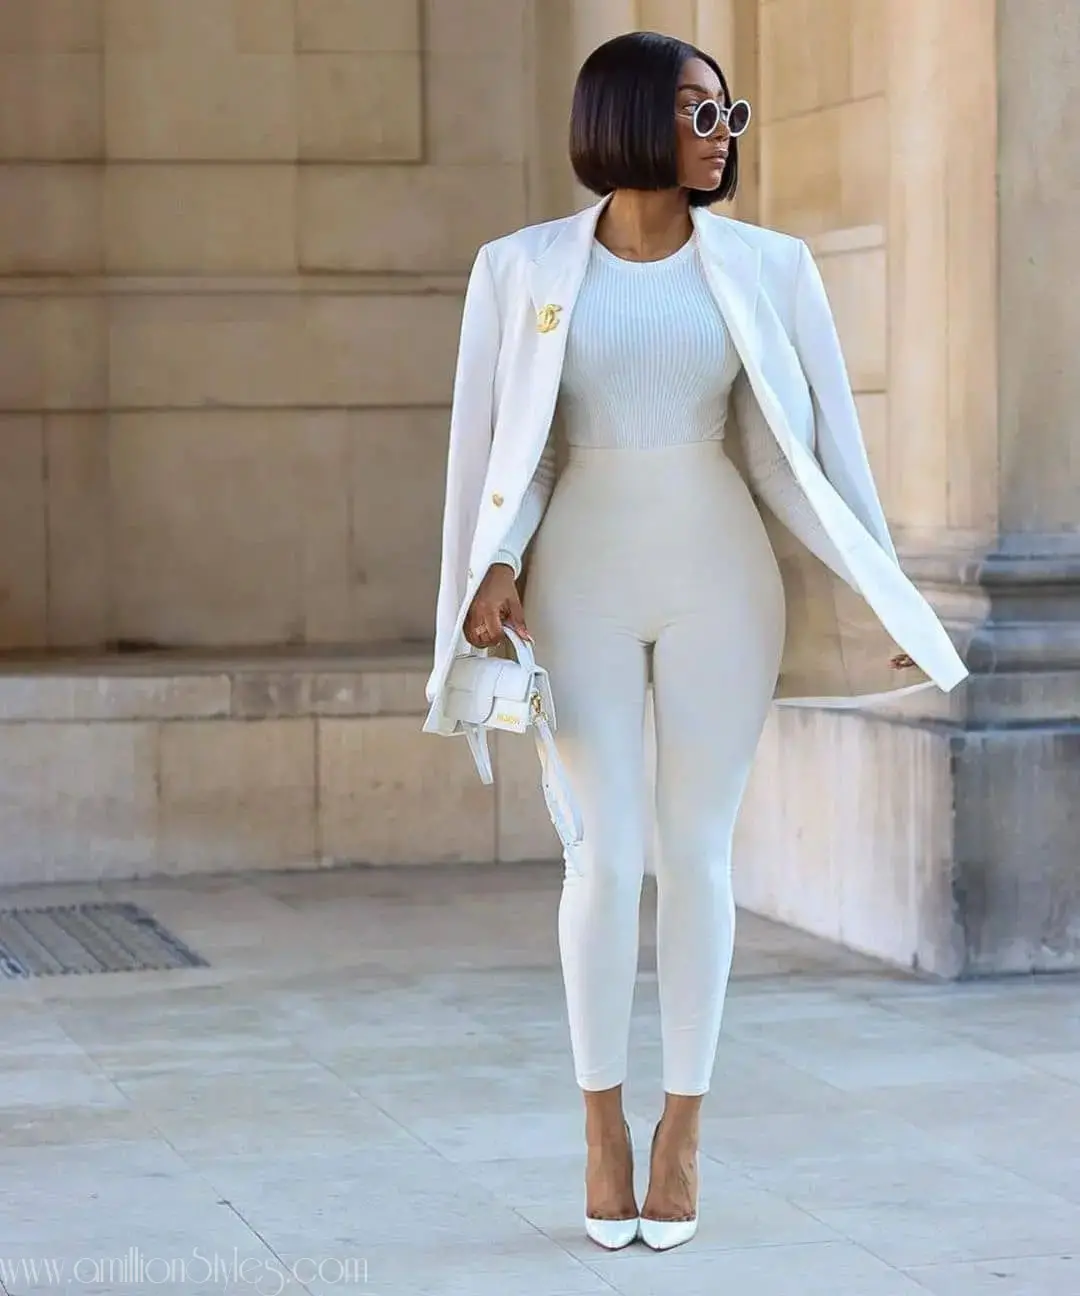 12 Ways To Rock A White Outfit With Class!